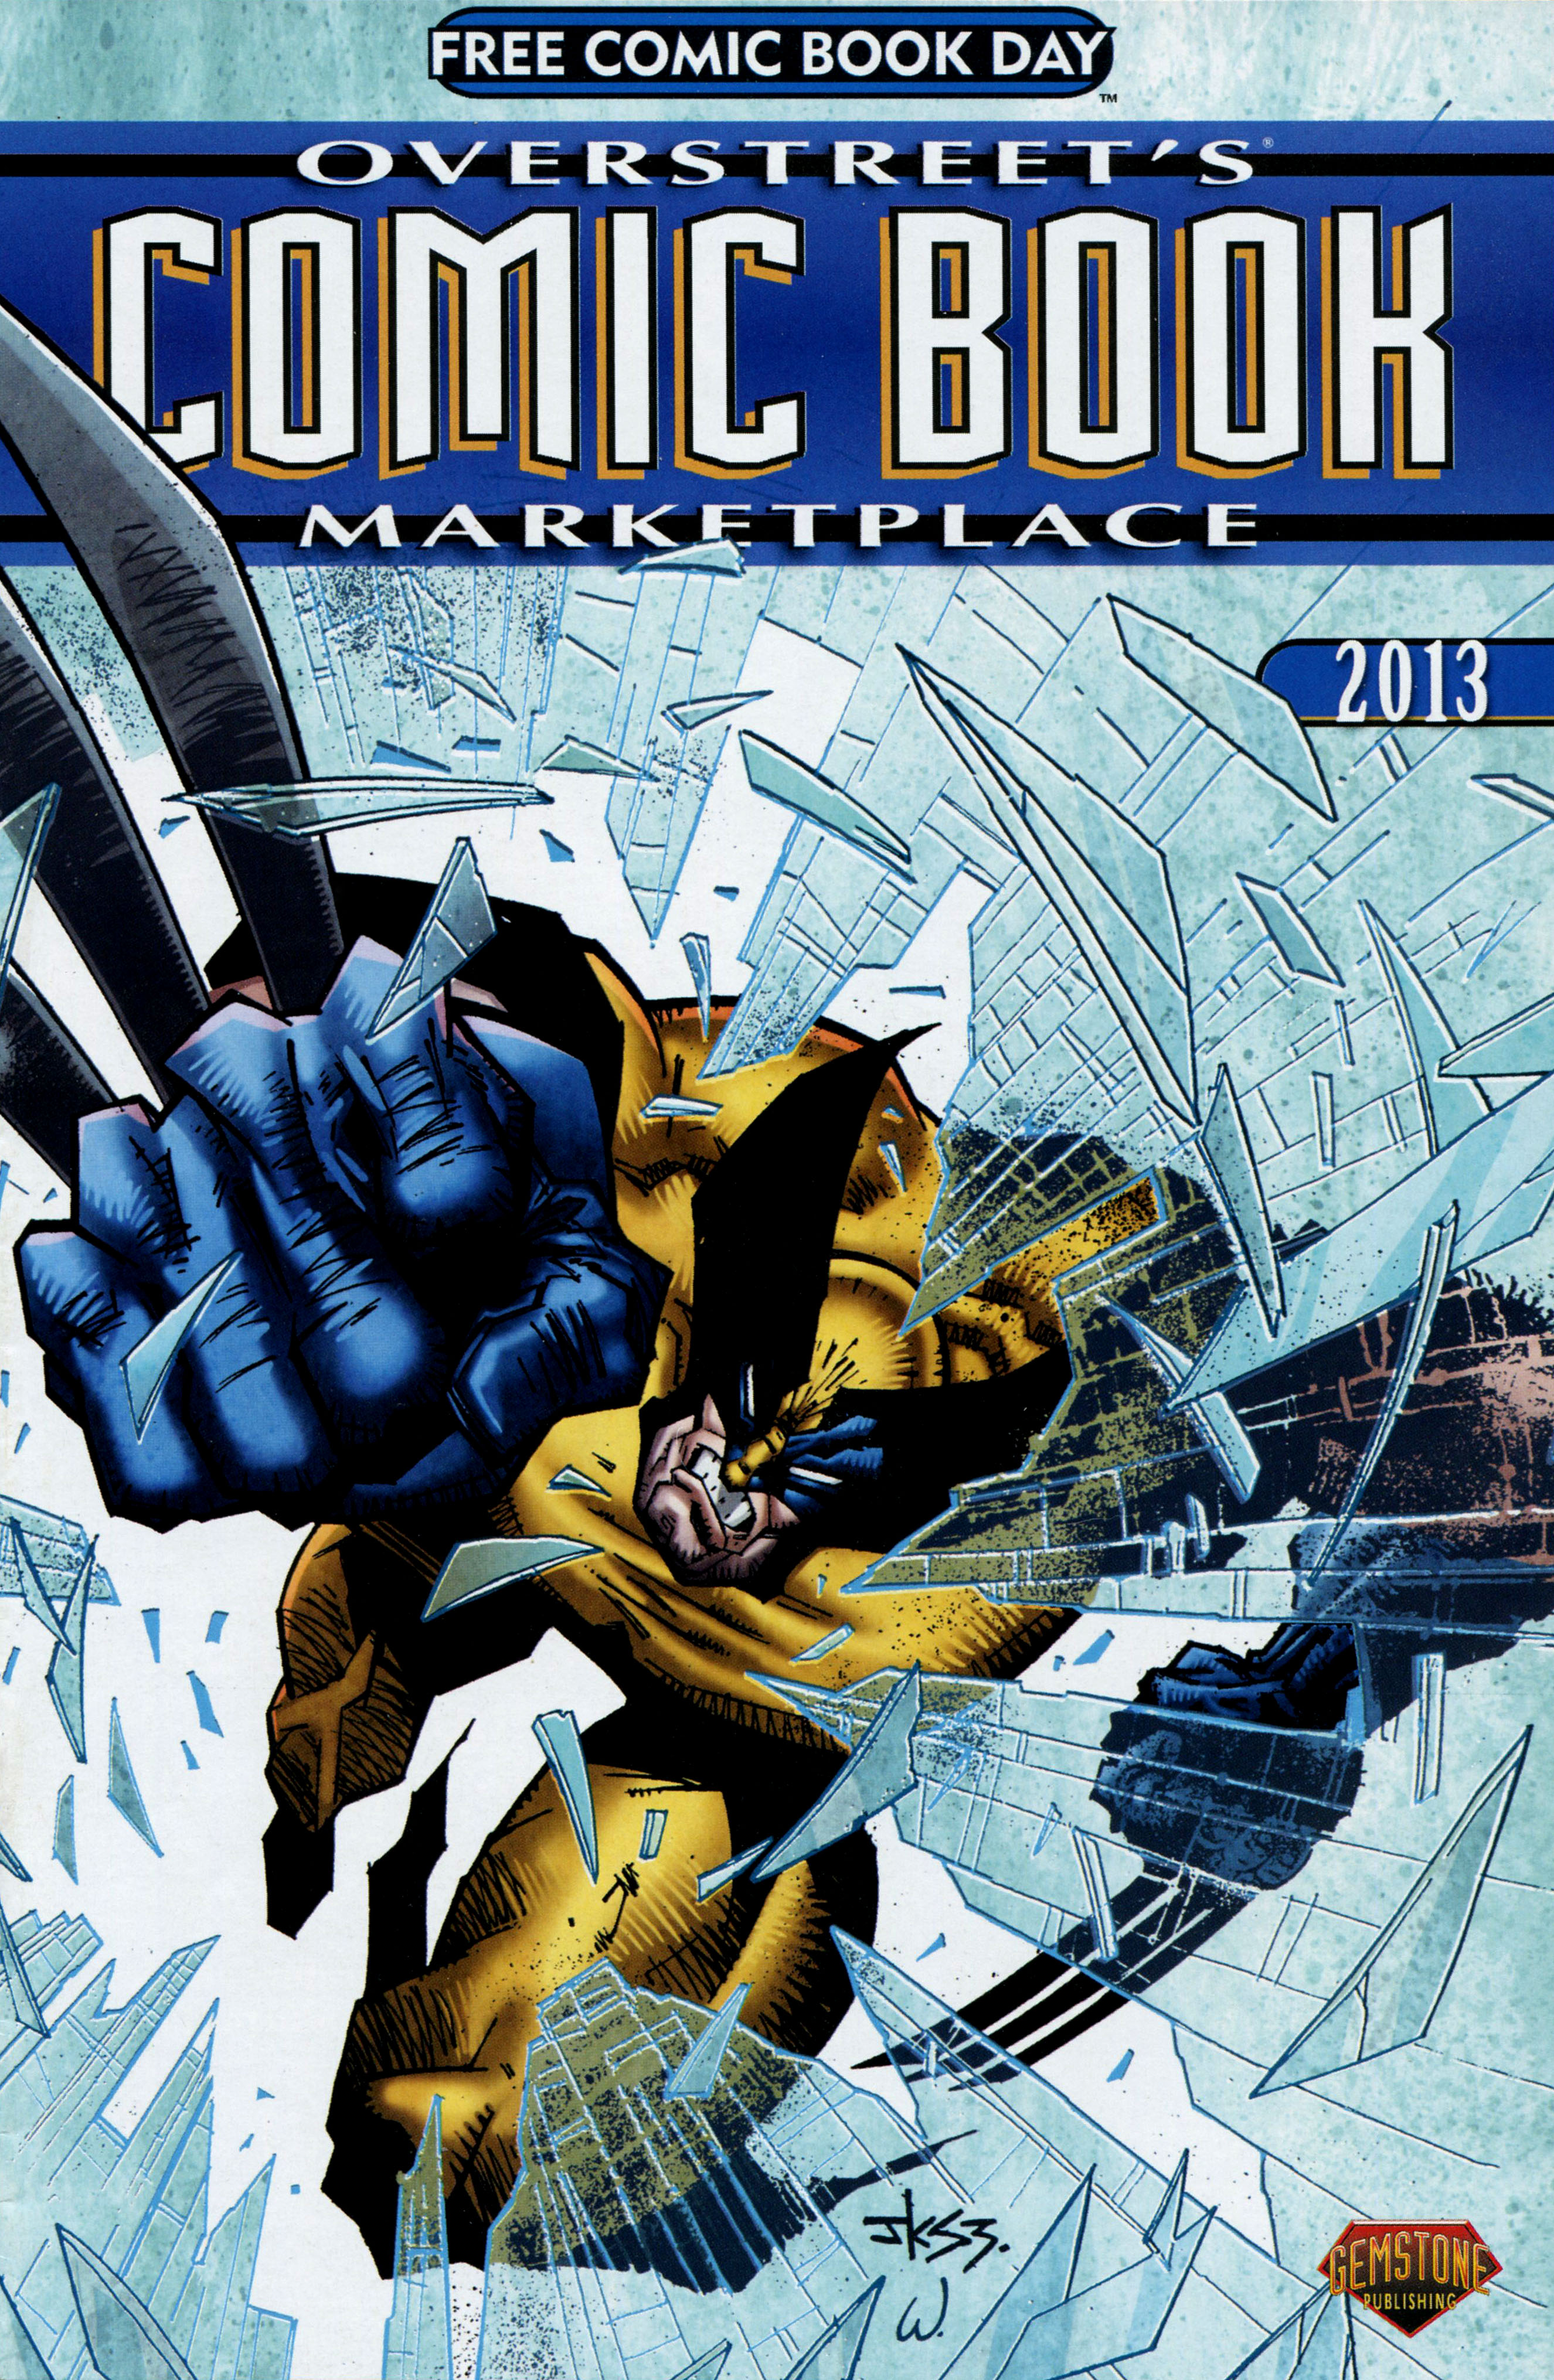 Read online Free Comic Book Day 2014 comic -  Issue # Overstreet s Comic Book Marketplace 03 - 1